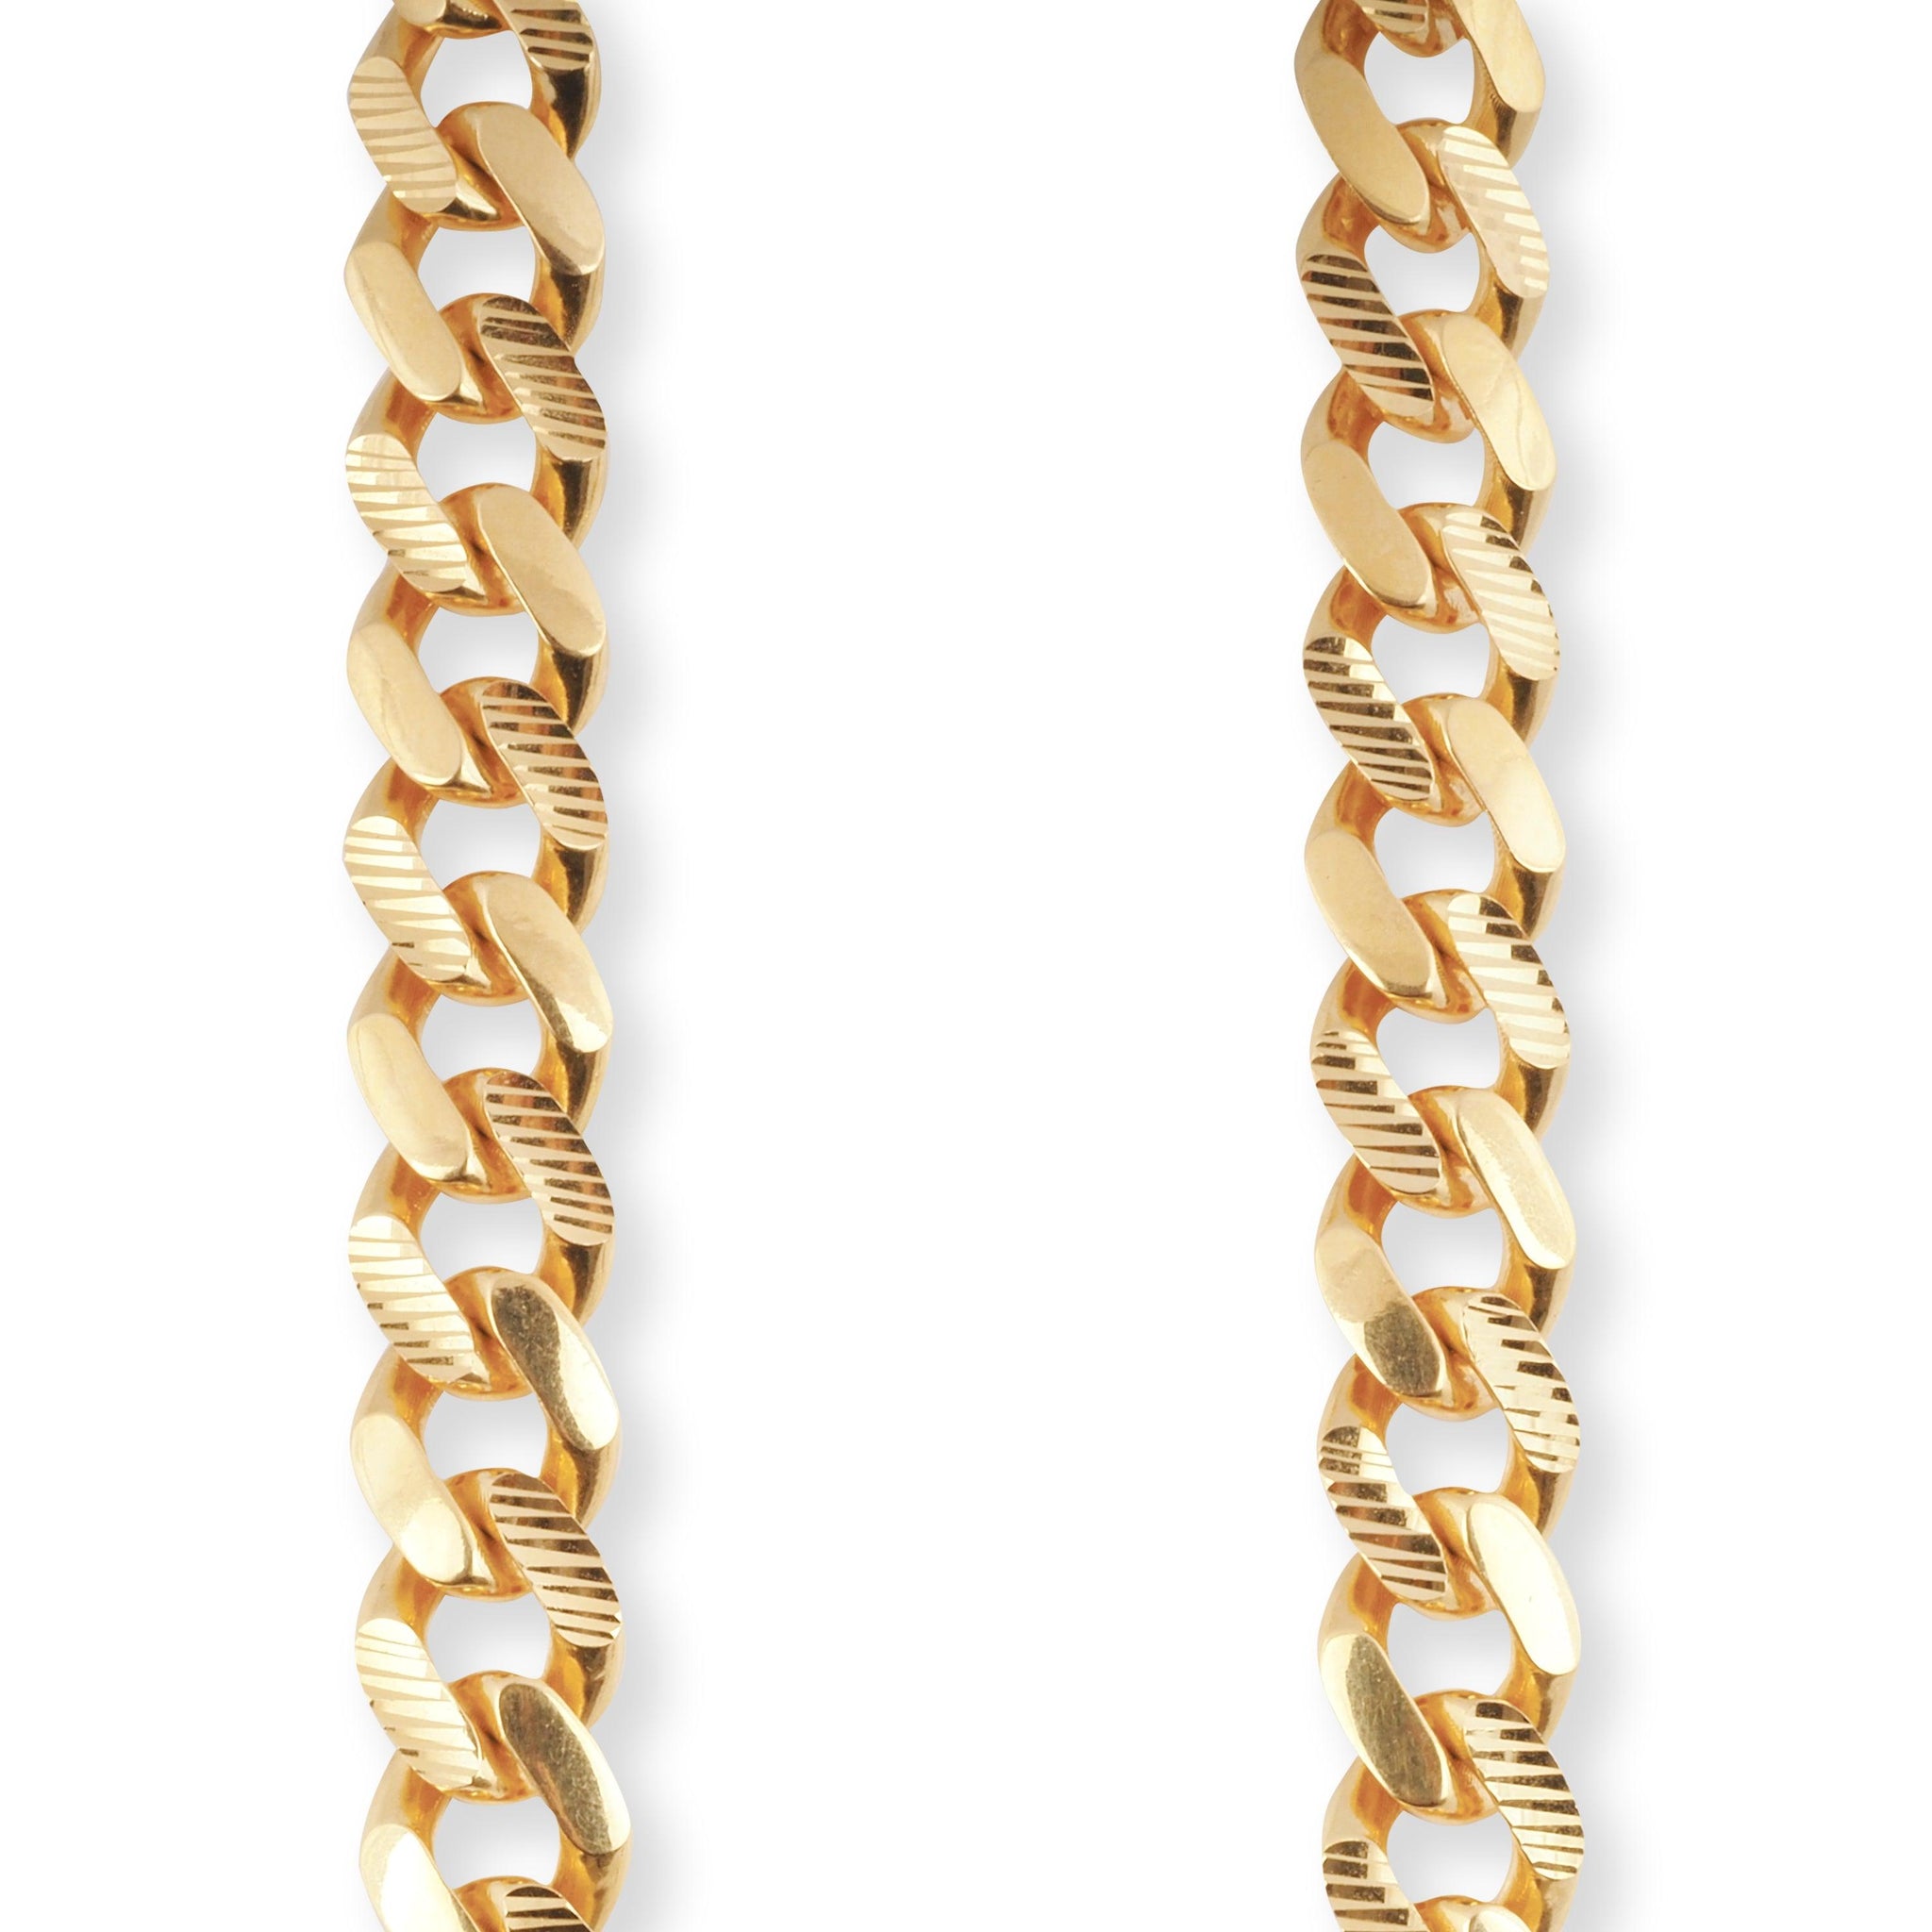 22ct Yellow Gold Curb Link Chain with Box Clasp N-7050